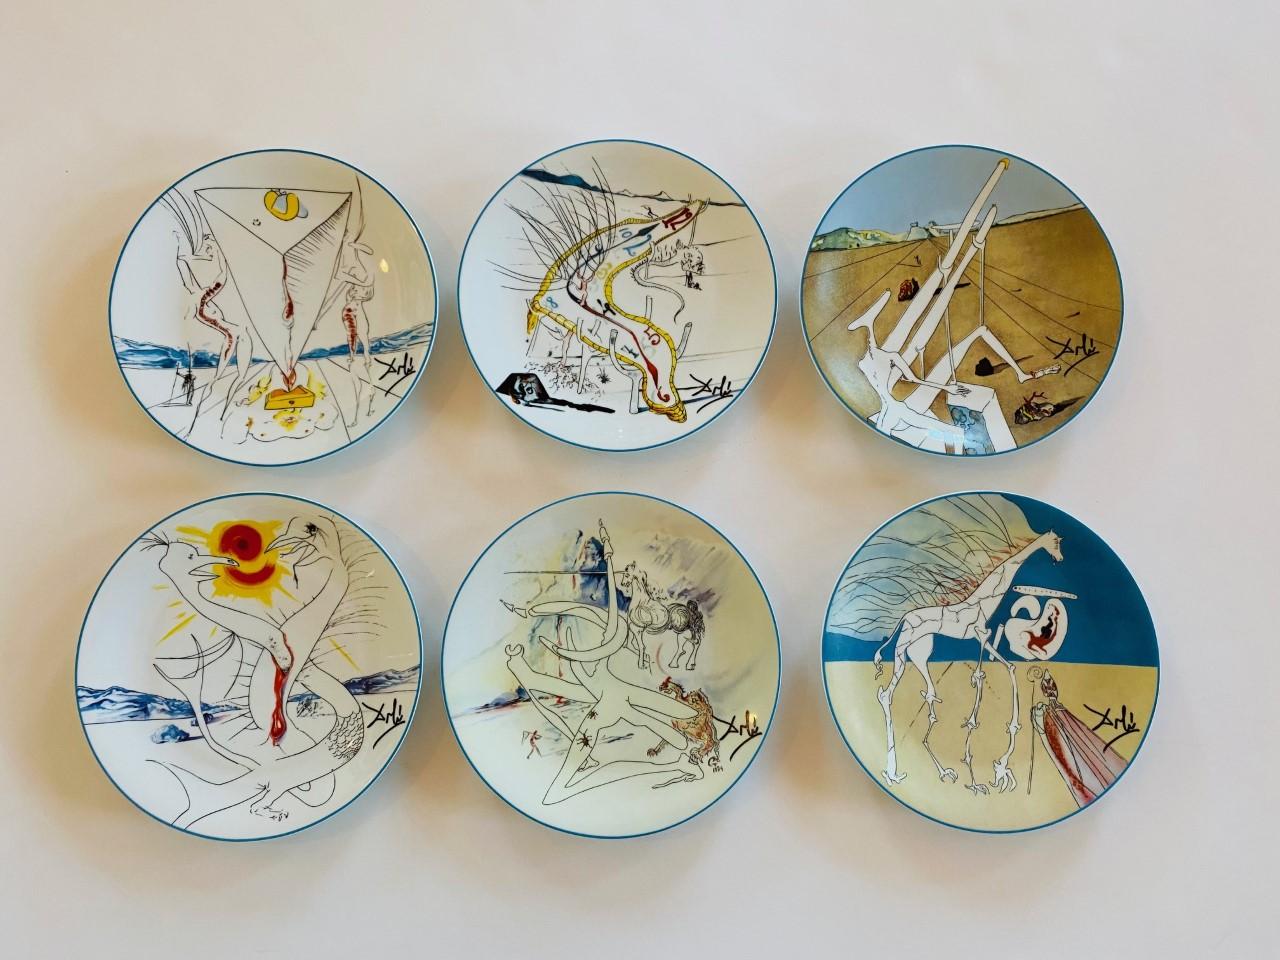 Vintage and unique porcelain pieces by Limoges France. This unique and rare collection by Limoges brings the work of Salvador Dali with 6 different works on each of the plates. This collection dates to the early 80s. Each piece is numbered (great